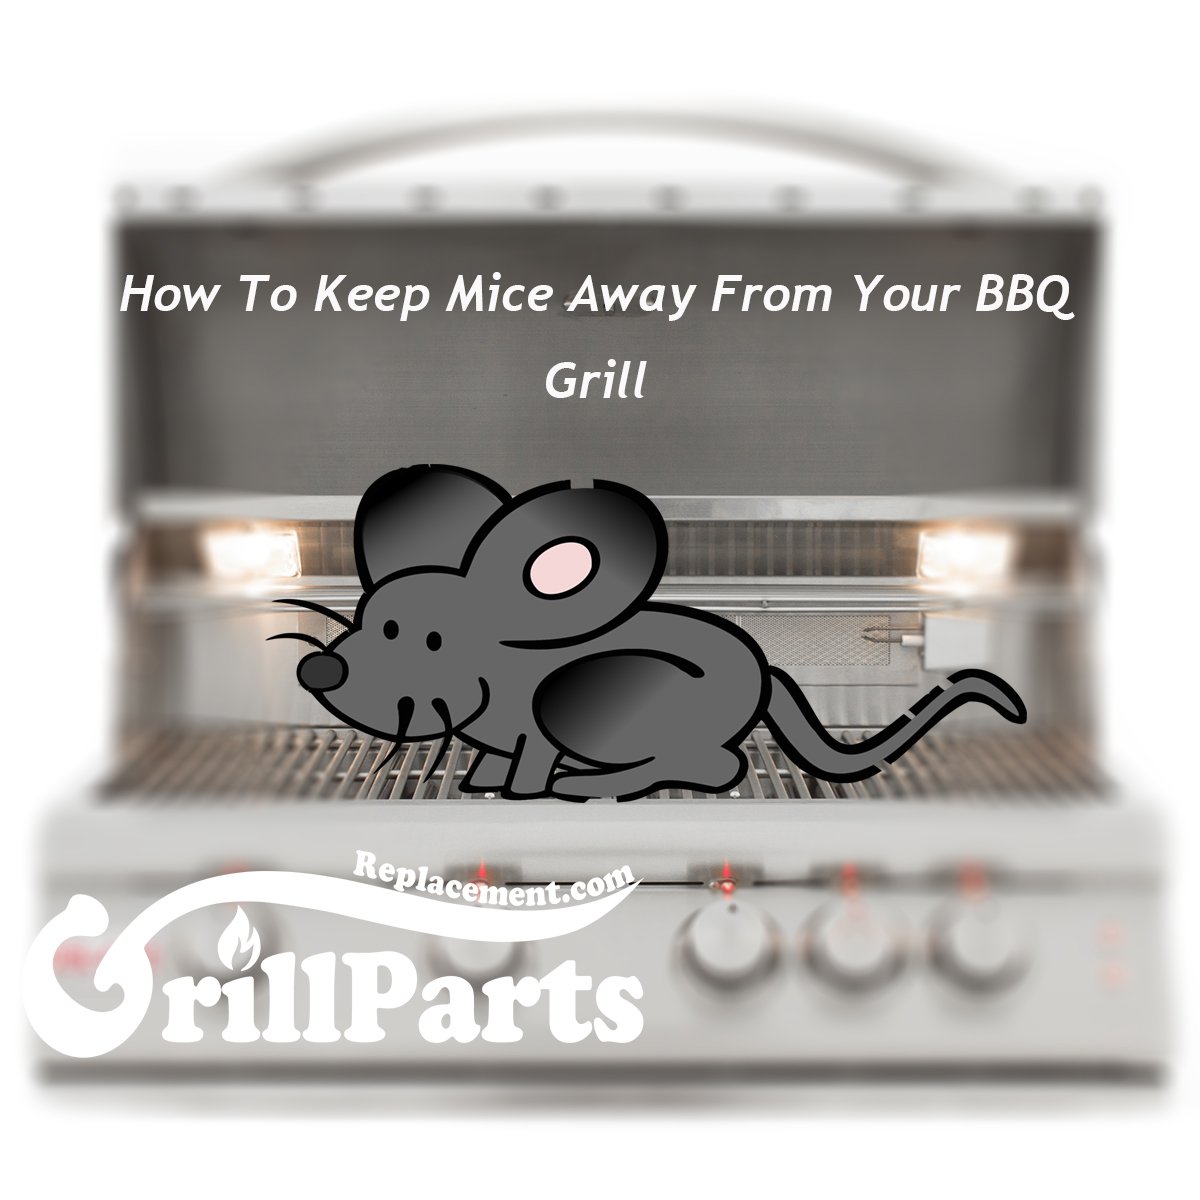 https://cdn.shopify.com/s/files/1/0247/5651/8948/articles/How-To-Keep-Mice-Away-From-Your-BBQ-Grill.jpg?v=1601629103